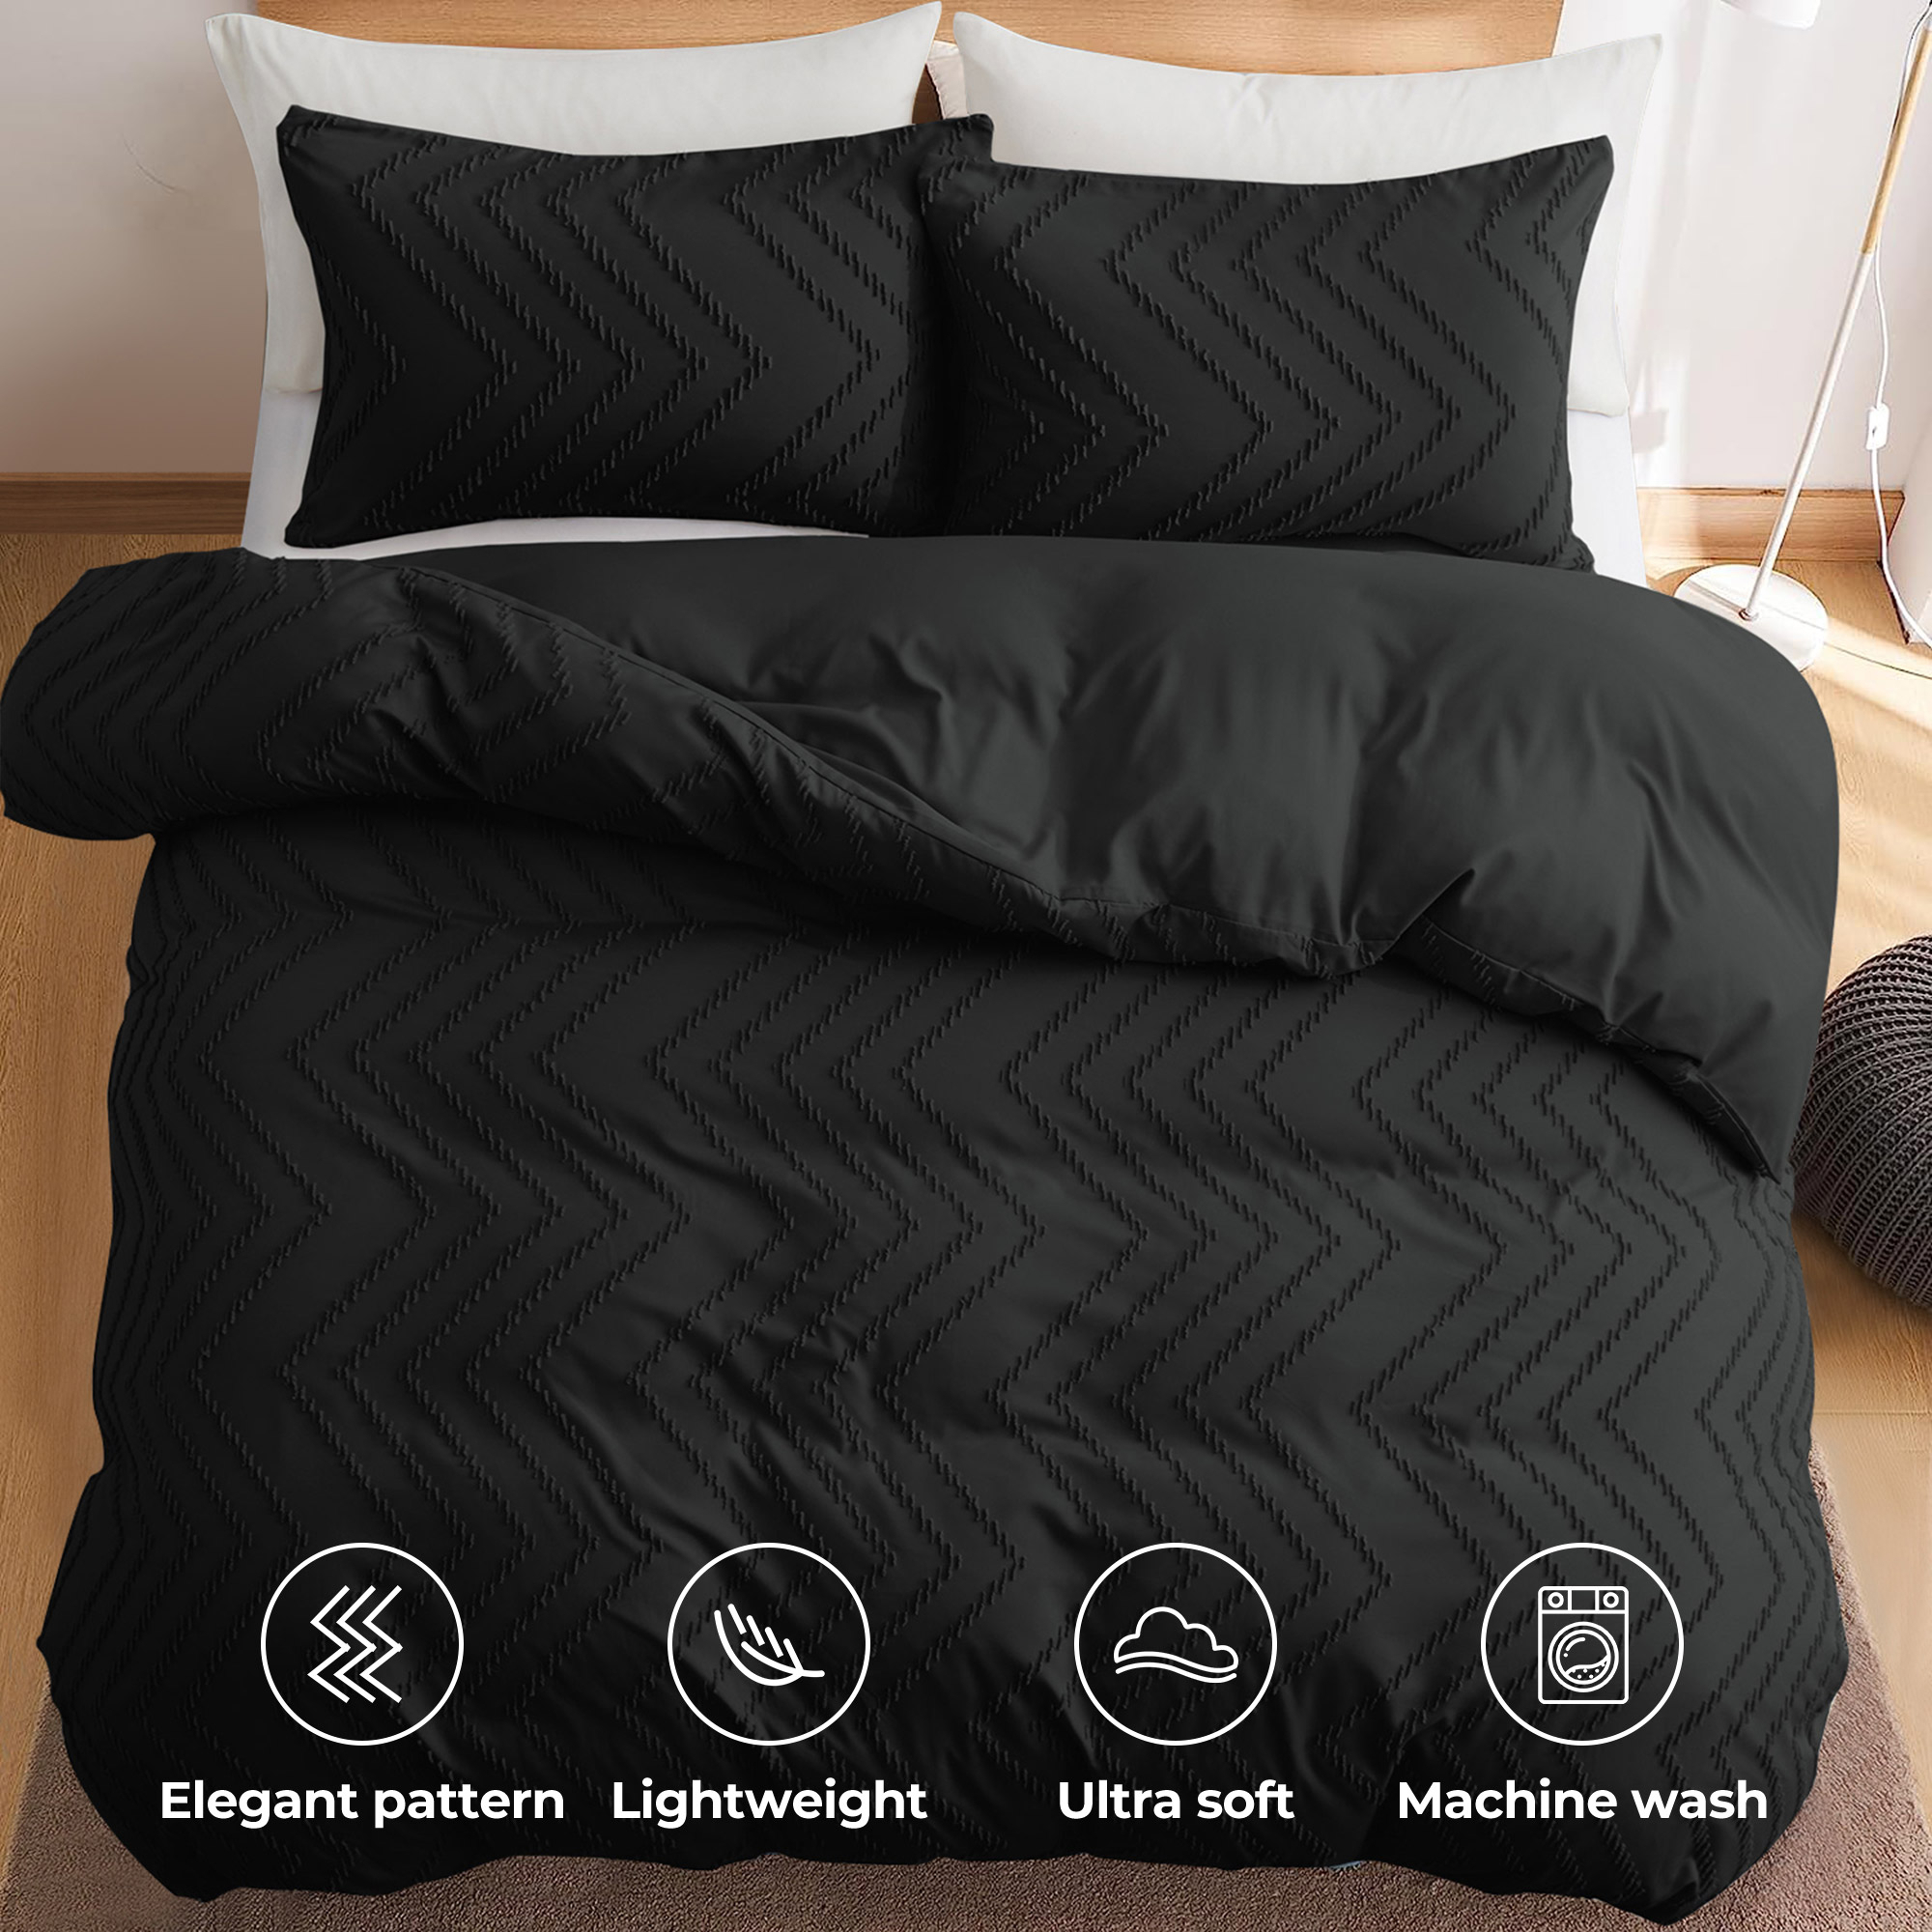 Basic Bedding Sets With All Season Goose Down Feather Comforter, 2 Pack Goose Down Pillows, Duvet Cover Set - Black Bundles Option, Twin Siz